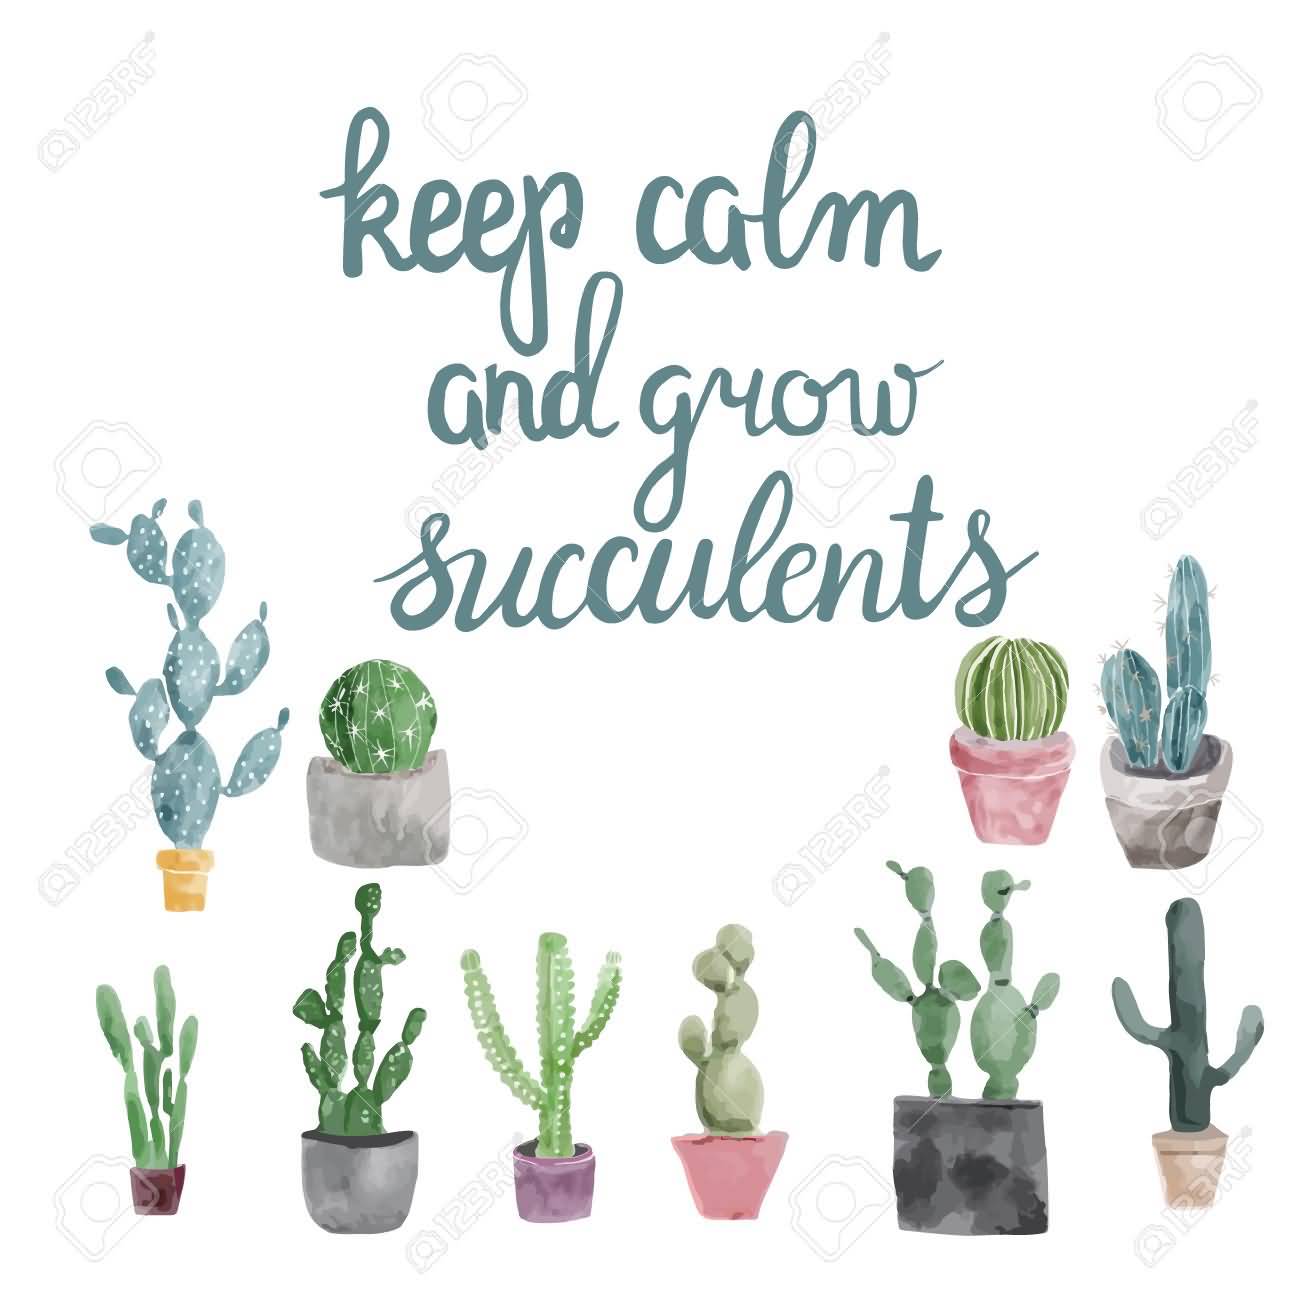 23 Succulent Quotes and Sayings With Images | QuotesBae